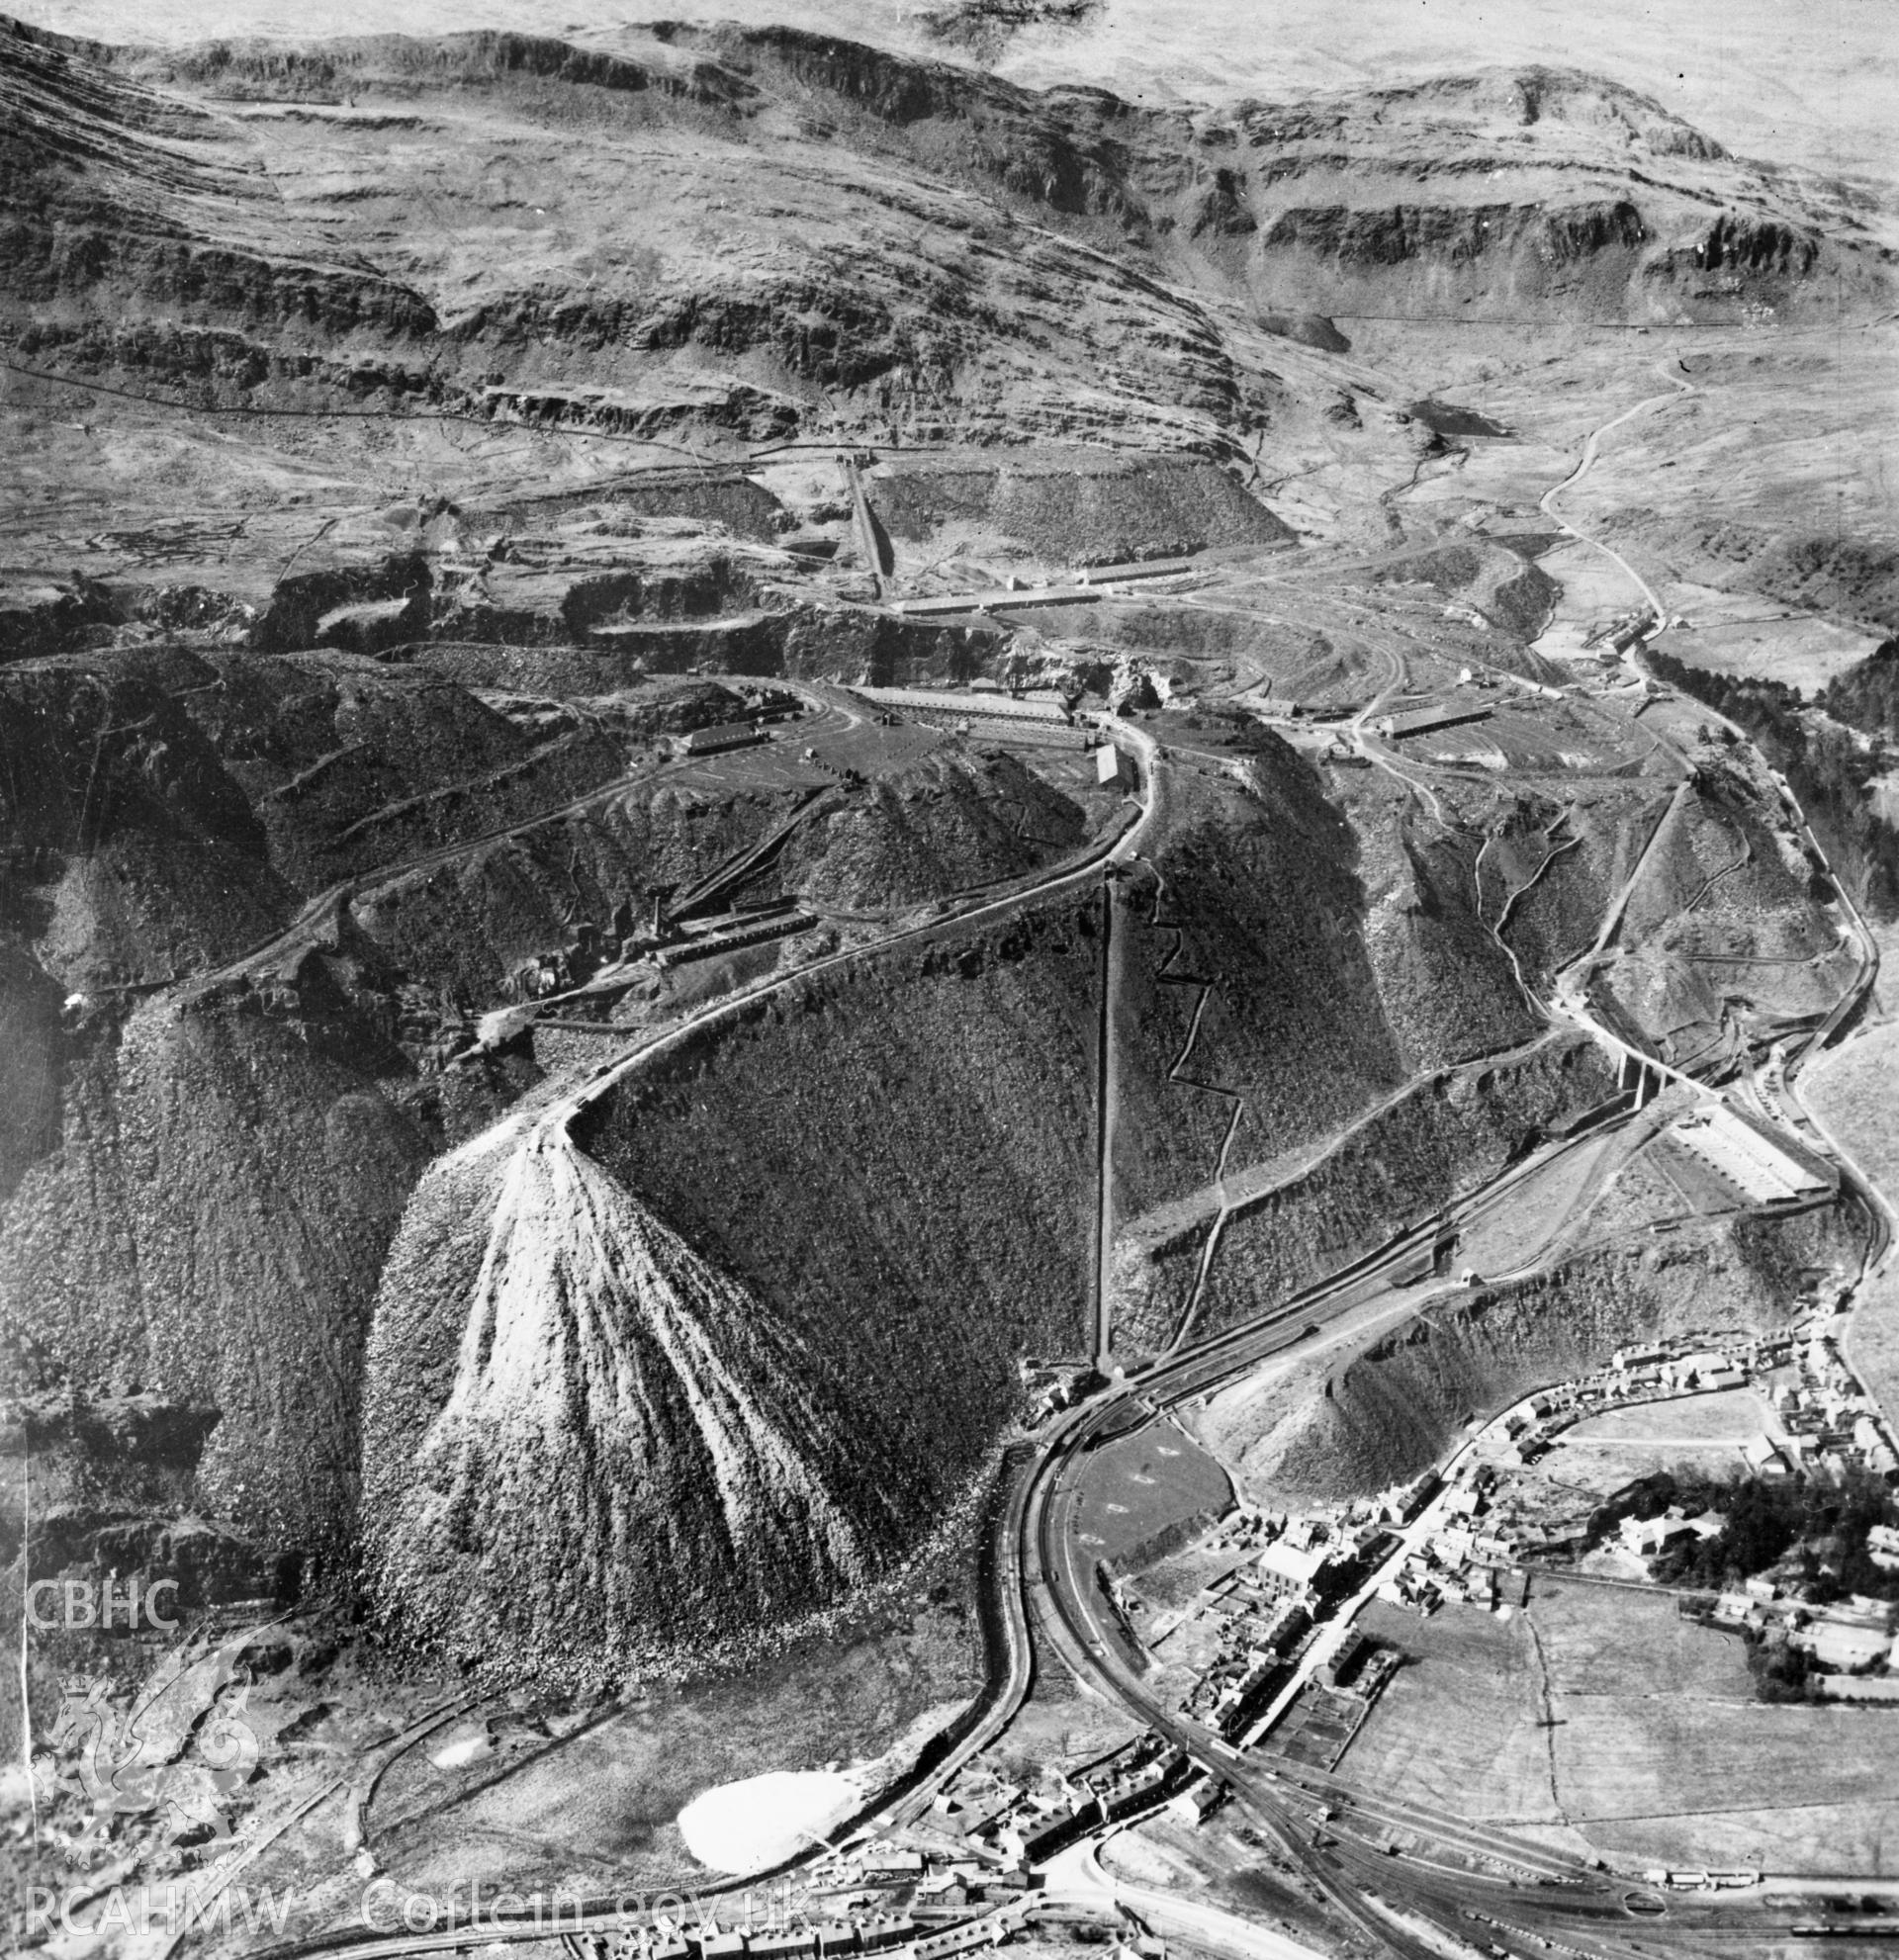 View of Oakley Slate quarries Co. Ltd., showing Rhiwbryfdir and zigzag miners path. Oblique aerial photograph, 5?" cut roll film.